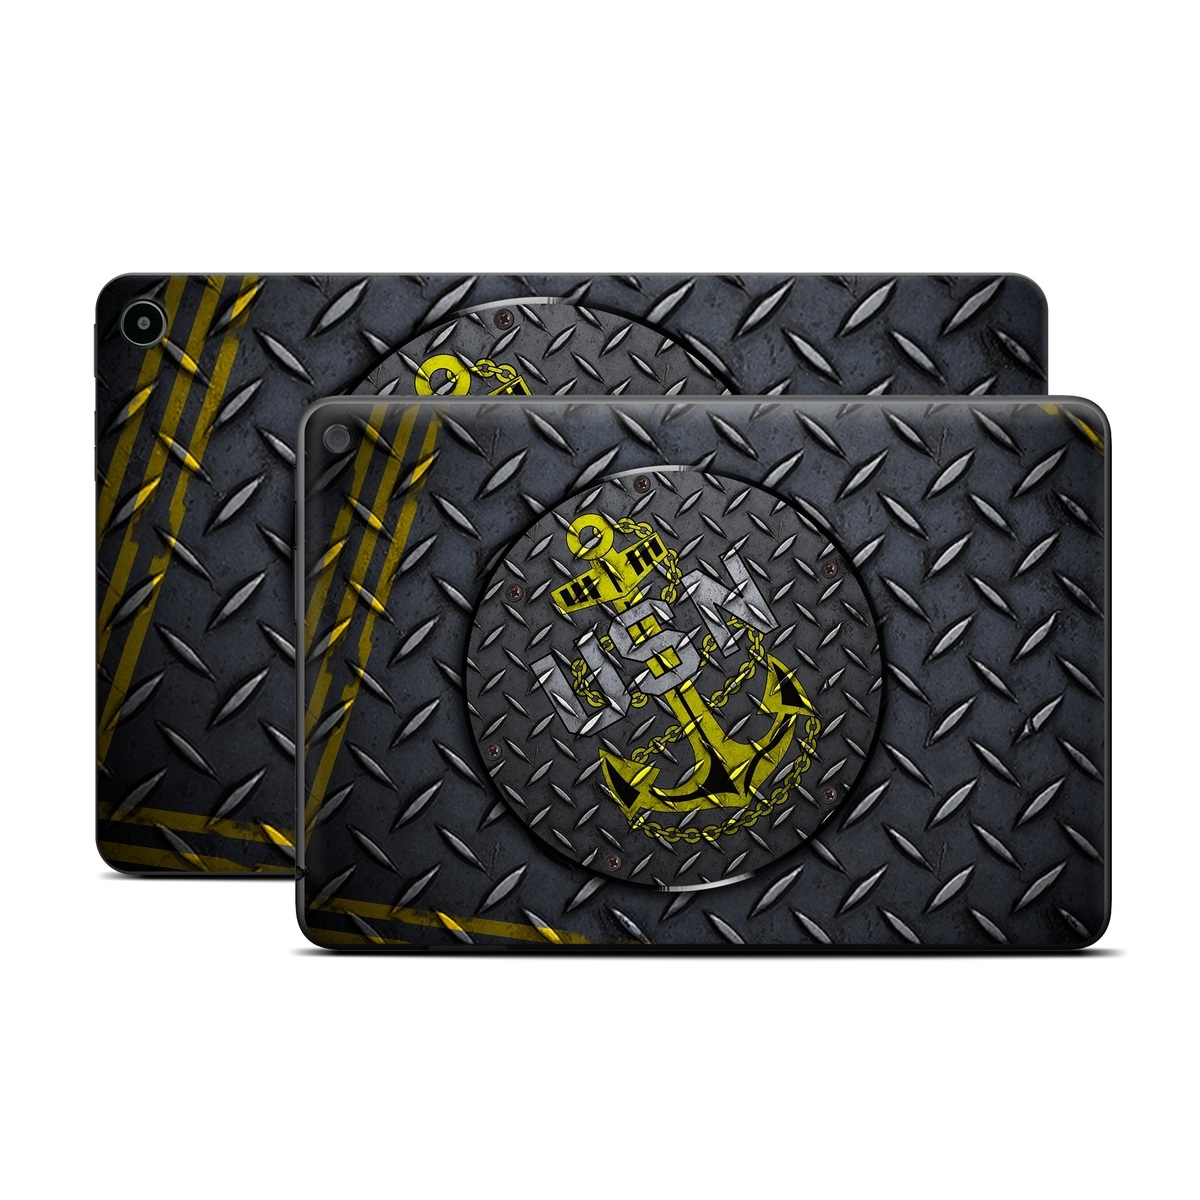 Amazon Fire Tablet Series Skin Skin design of Tire, Automotive tire, Formula one tyres, Automotive wheel system, Font, Auto part, Tread, Synthetic rubber, Pattern, Logo, with black, gray, green colors